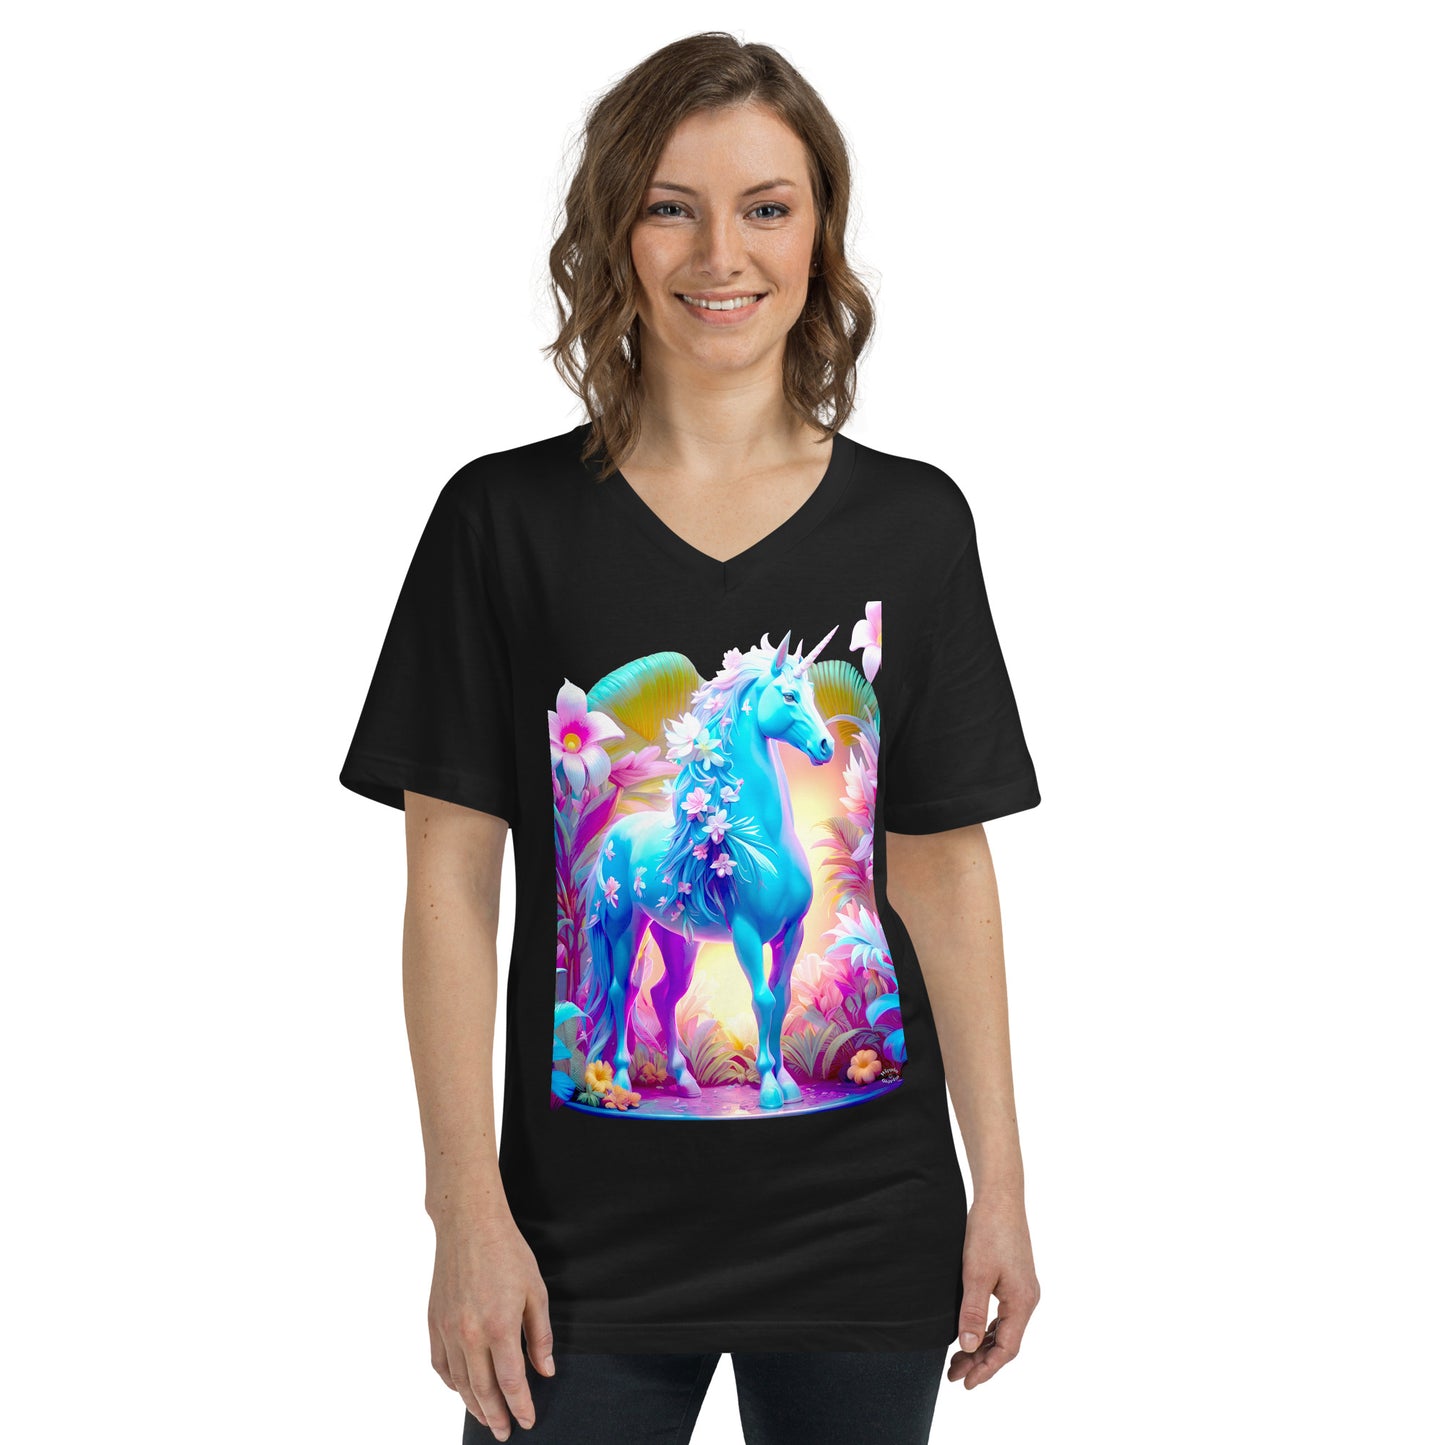 A picture of a woman wearing a tshirt with a brightly colored unicorn surrounded by a colorful garden - Jungle Unicorn Unisex Short Sleeve V-Neck TShirt Media - ft - black